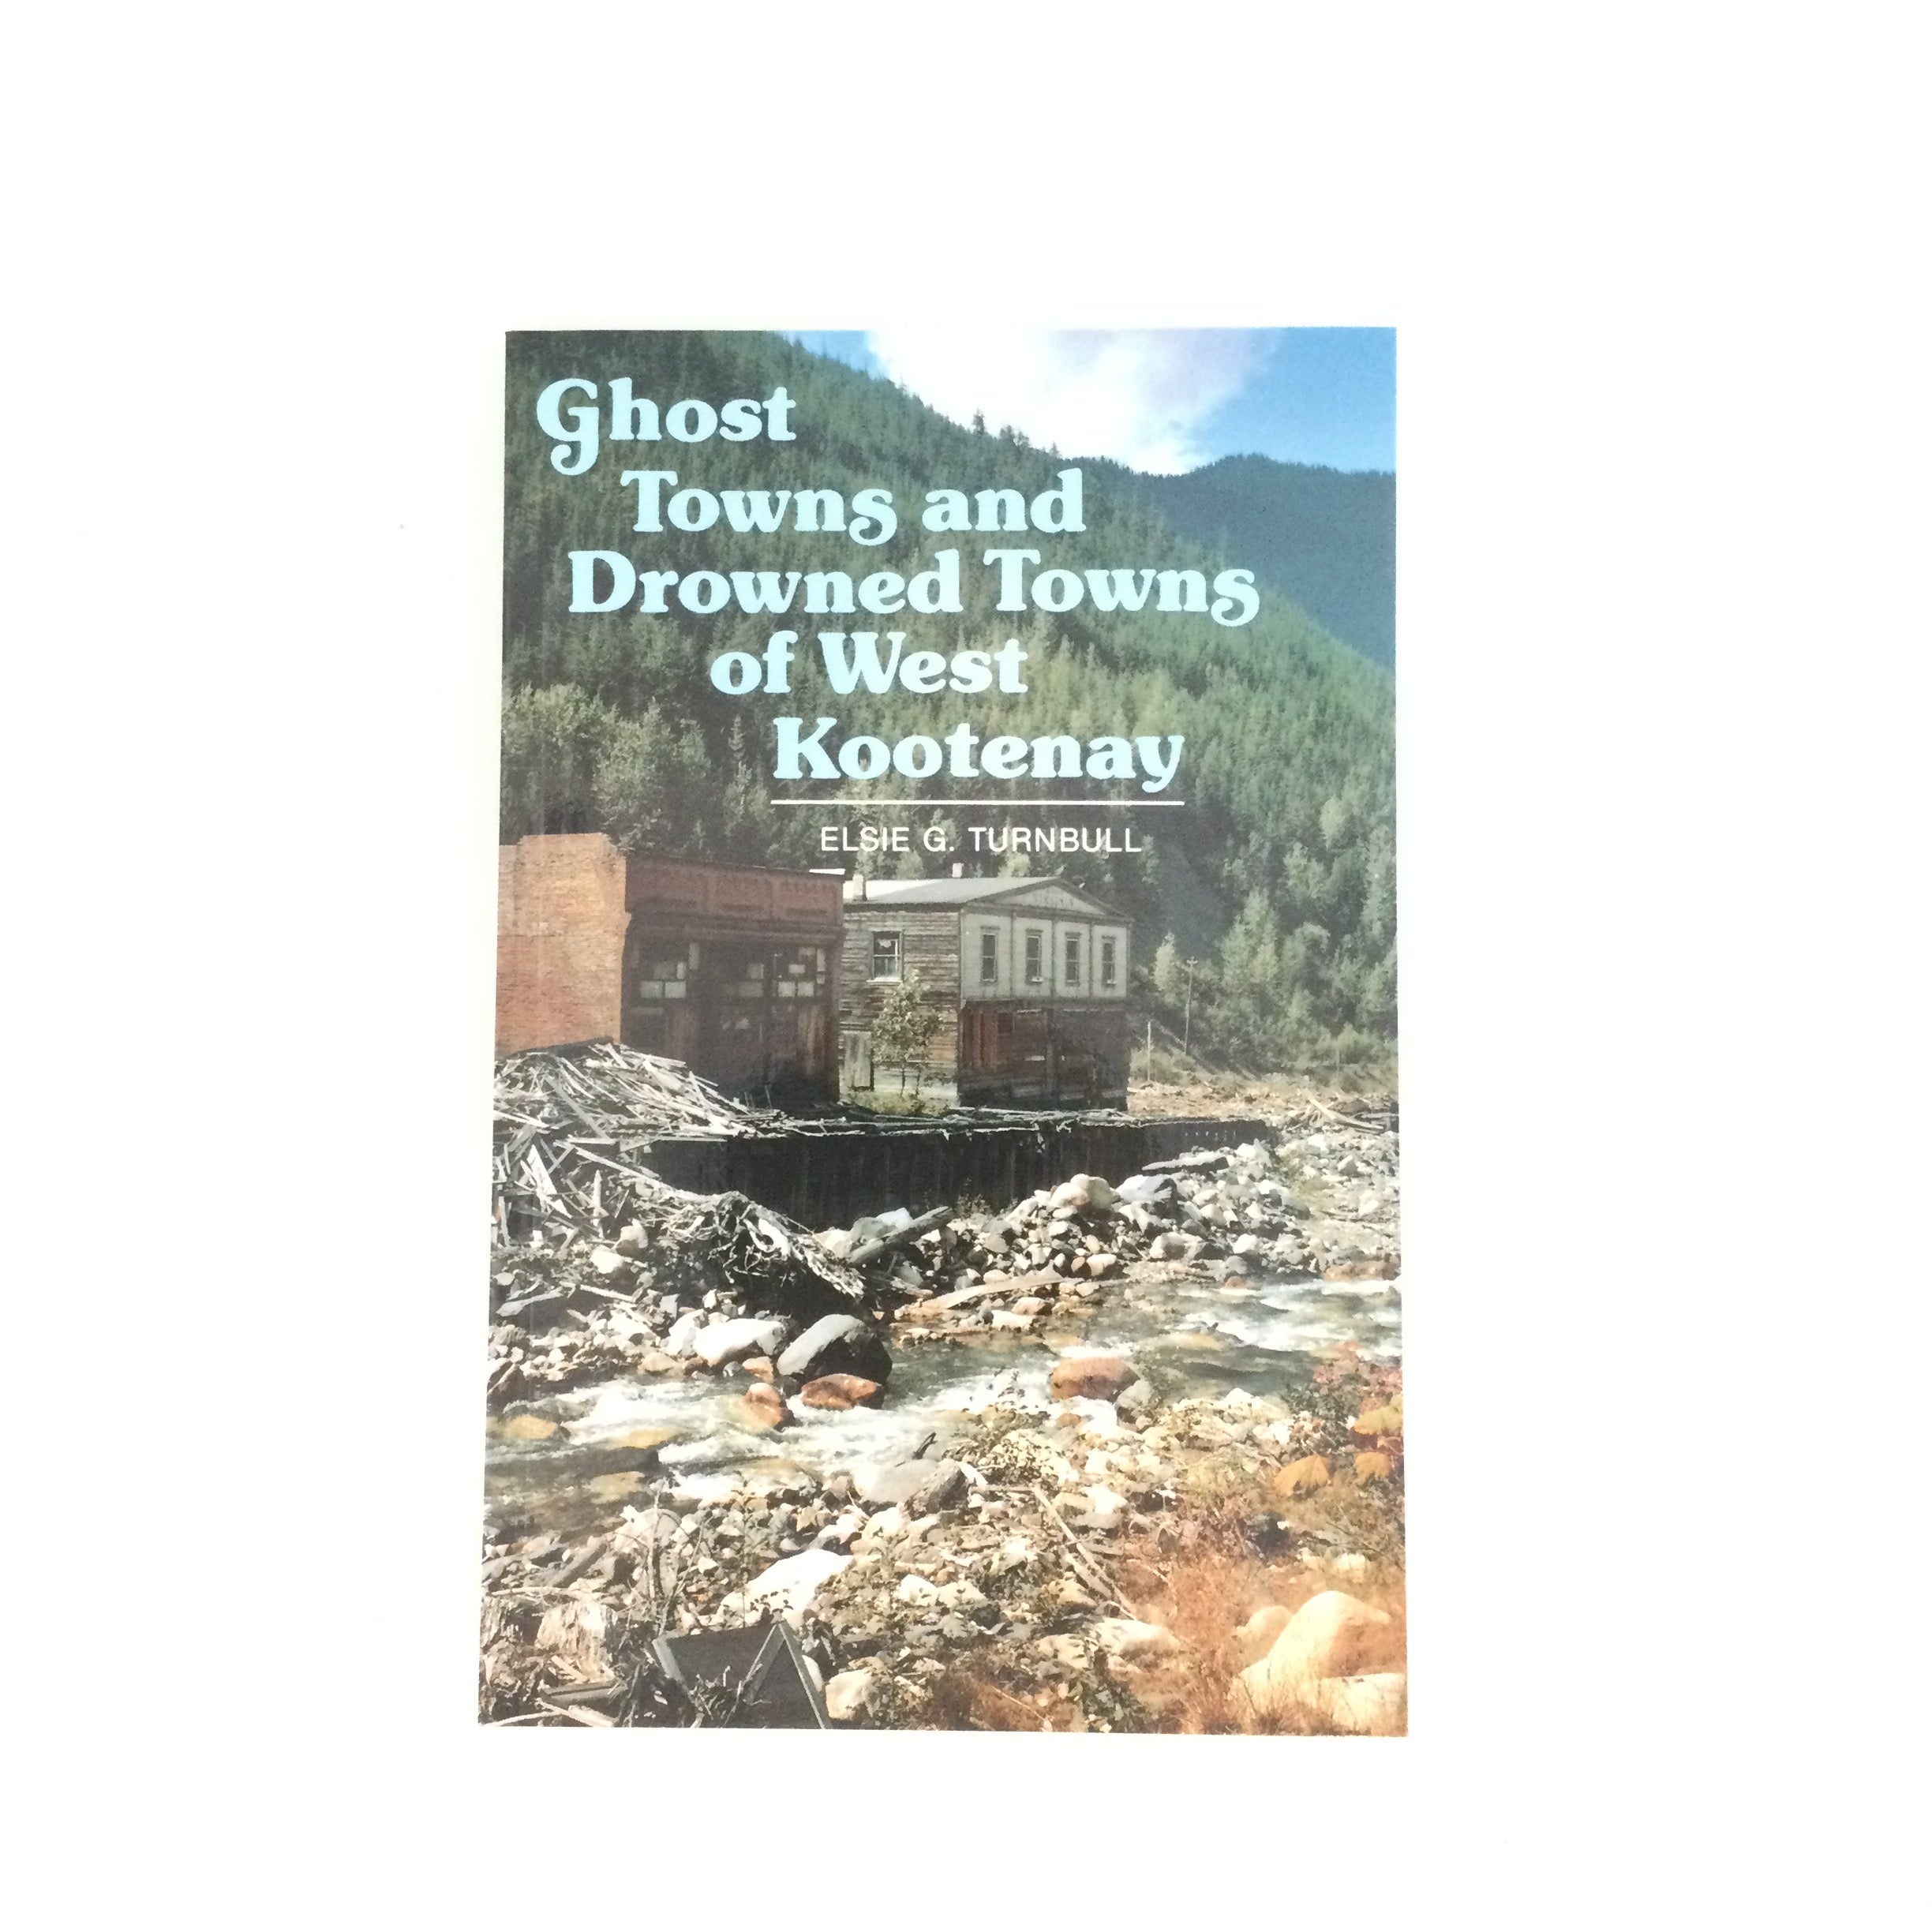 Ghost Towns and Drowned Towns of West Kootenay